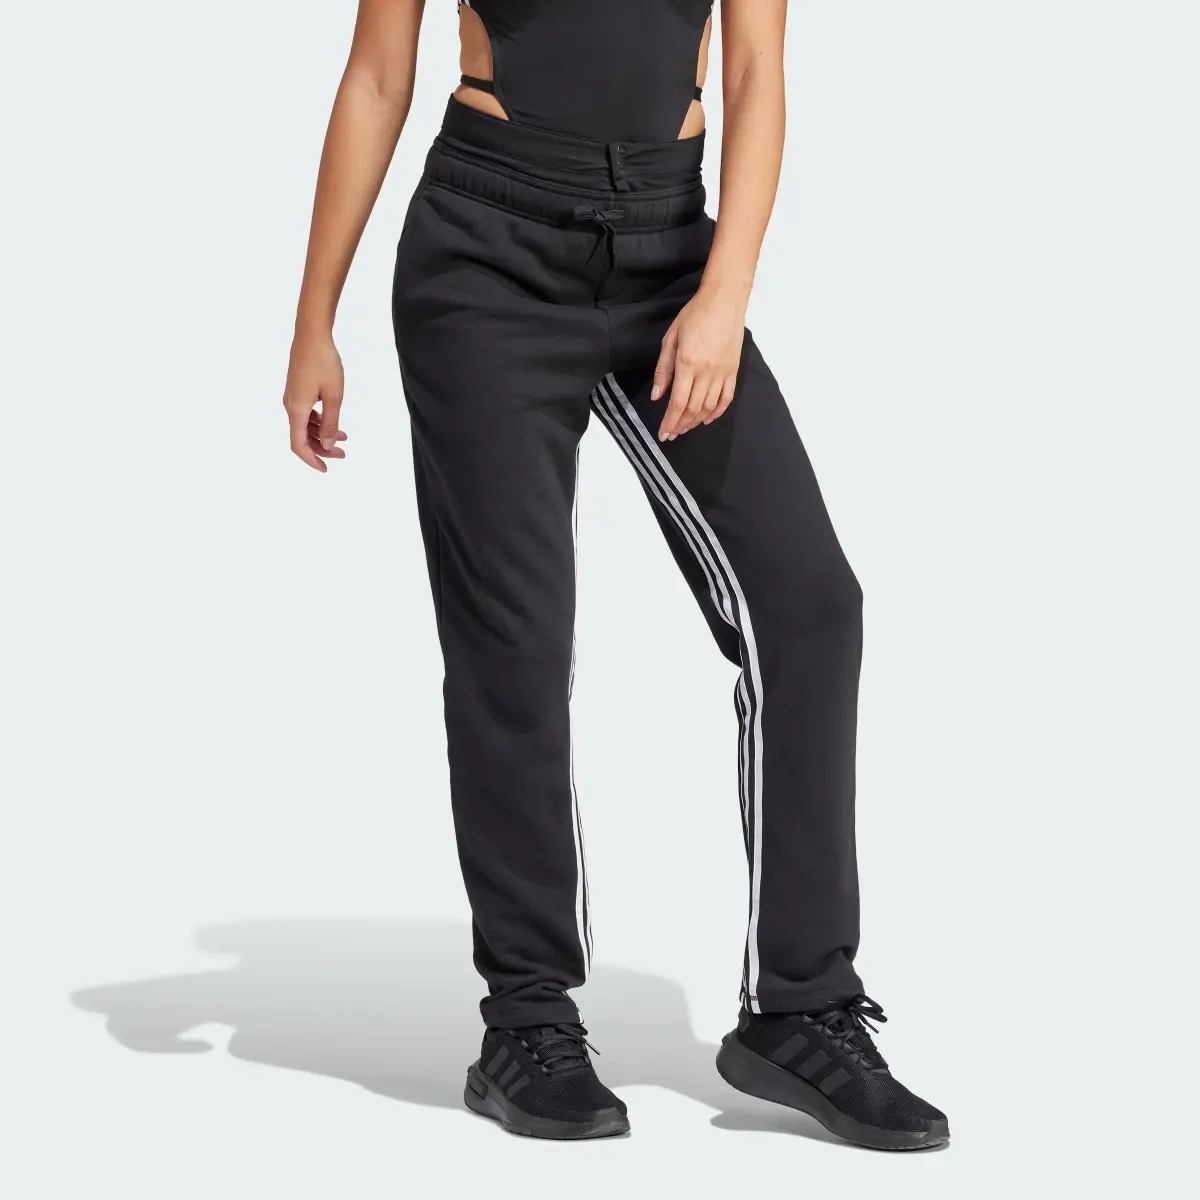 Adidas Express All-Gender Anti-Microbial Joggers. 3